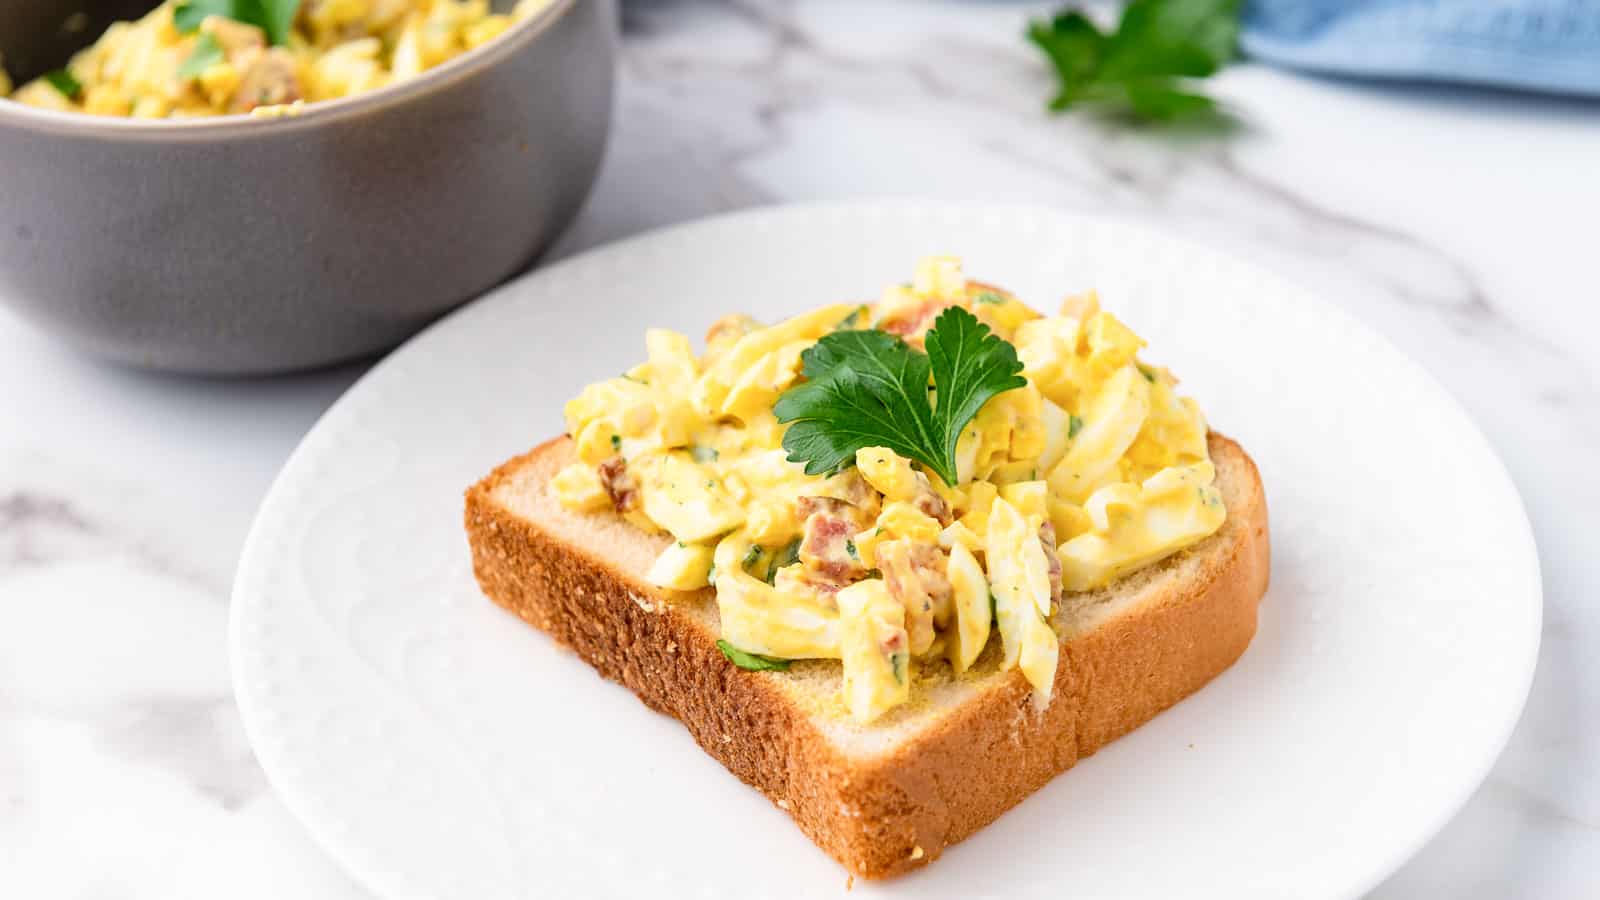 An egg salad sandwich on a slice of bread with parsley.